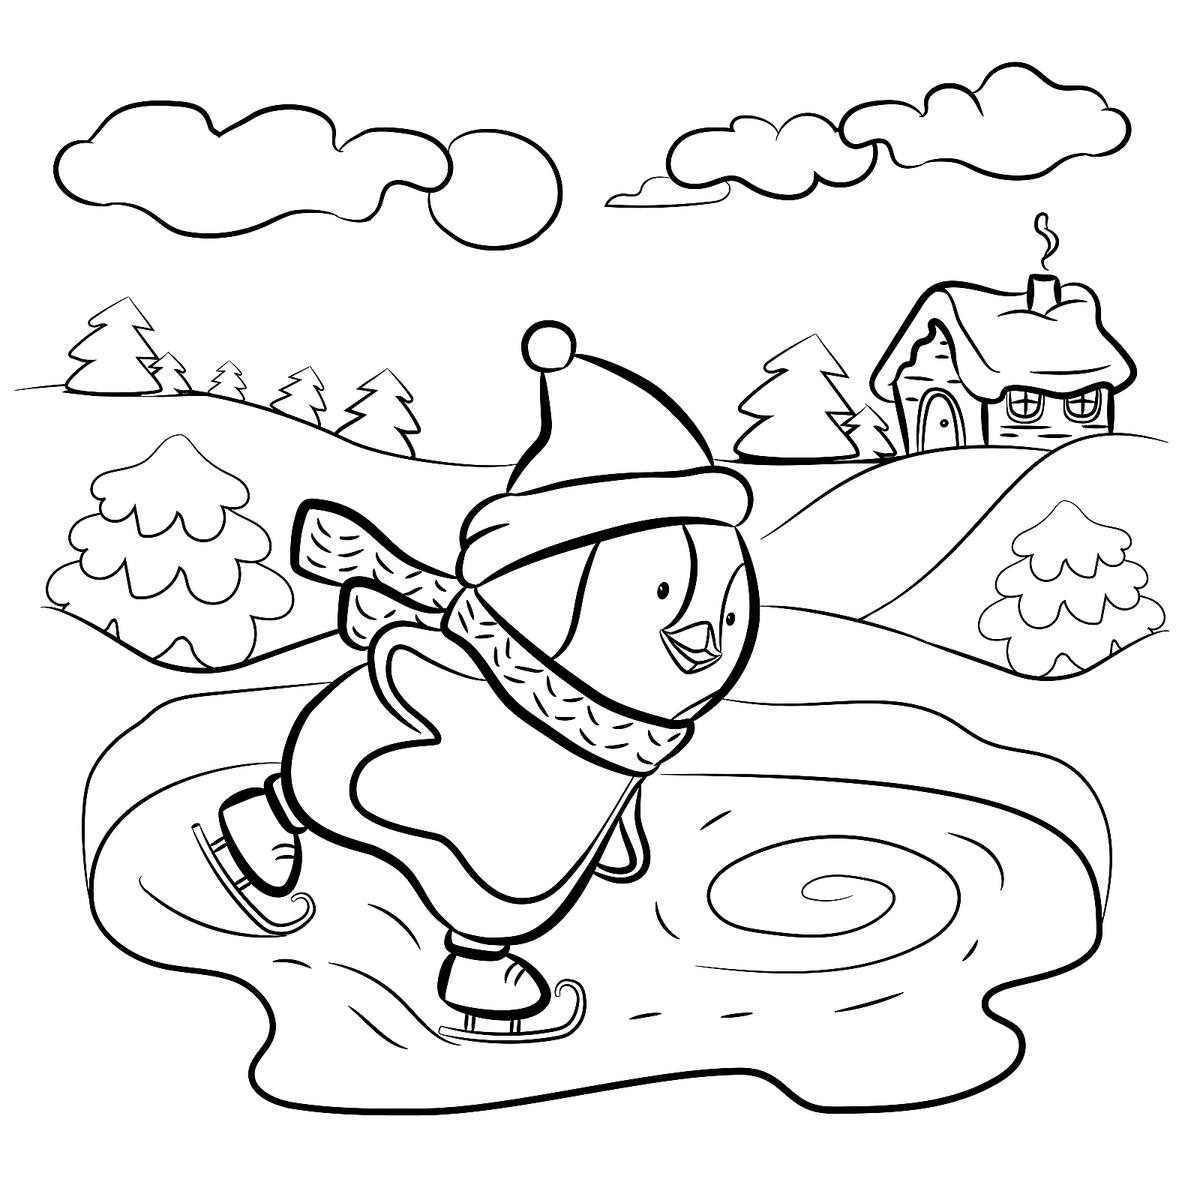 Kids Winter Coloring Pages
 Winter Puzzle & Coloring Pages Printable Winter Themed